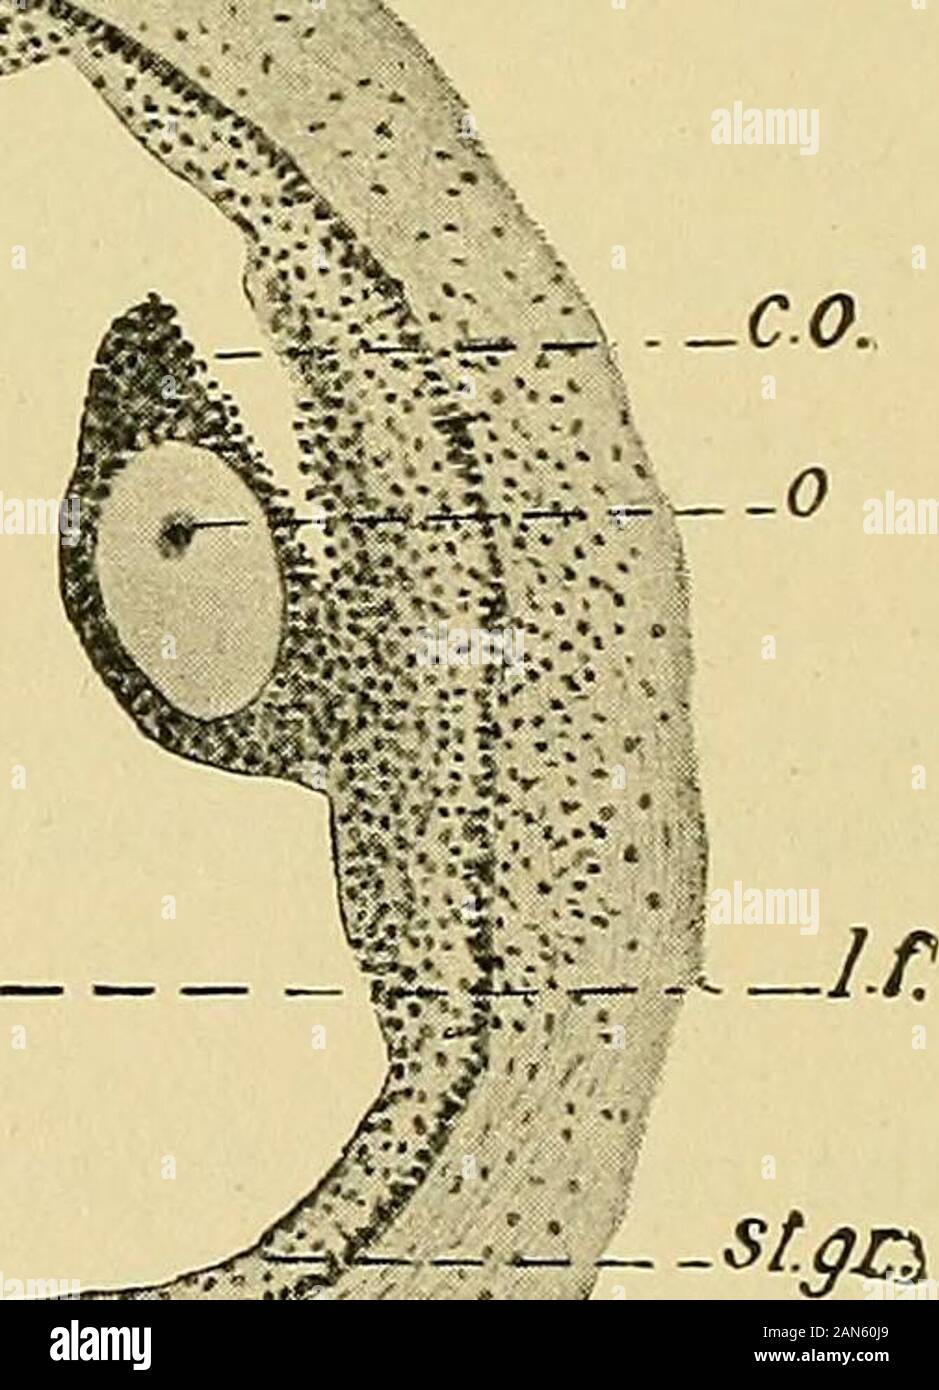 Pathology and treatment of diseases of women . ^jj^ffg^^^^^S^i^p^ - ti. ff-&lt; Fig. 12.—Folliculus Vesiculosus (Graafian Follicle), ti, tunica interna; st gr, stratumgranulosum; If, liquor folliculi; co, cumulus oophorus; o, ovulum; fp, folliculi pri-marii. (Authors preparation. Zeiss, Obj. AA, Oc. 4.) DEVELOPMENT OF THE FEMALE GENITALIA 17 and gets into the tube. Here it is either impregnated or it perishesunfecundated. A hematoma is next formed in the ruptured follicle, surrounded bya macroscopically visible, undulated, yellow cellular membrane, the luteinmembrane (transformed follicular ep Stock Photo